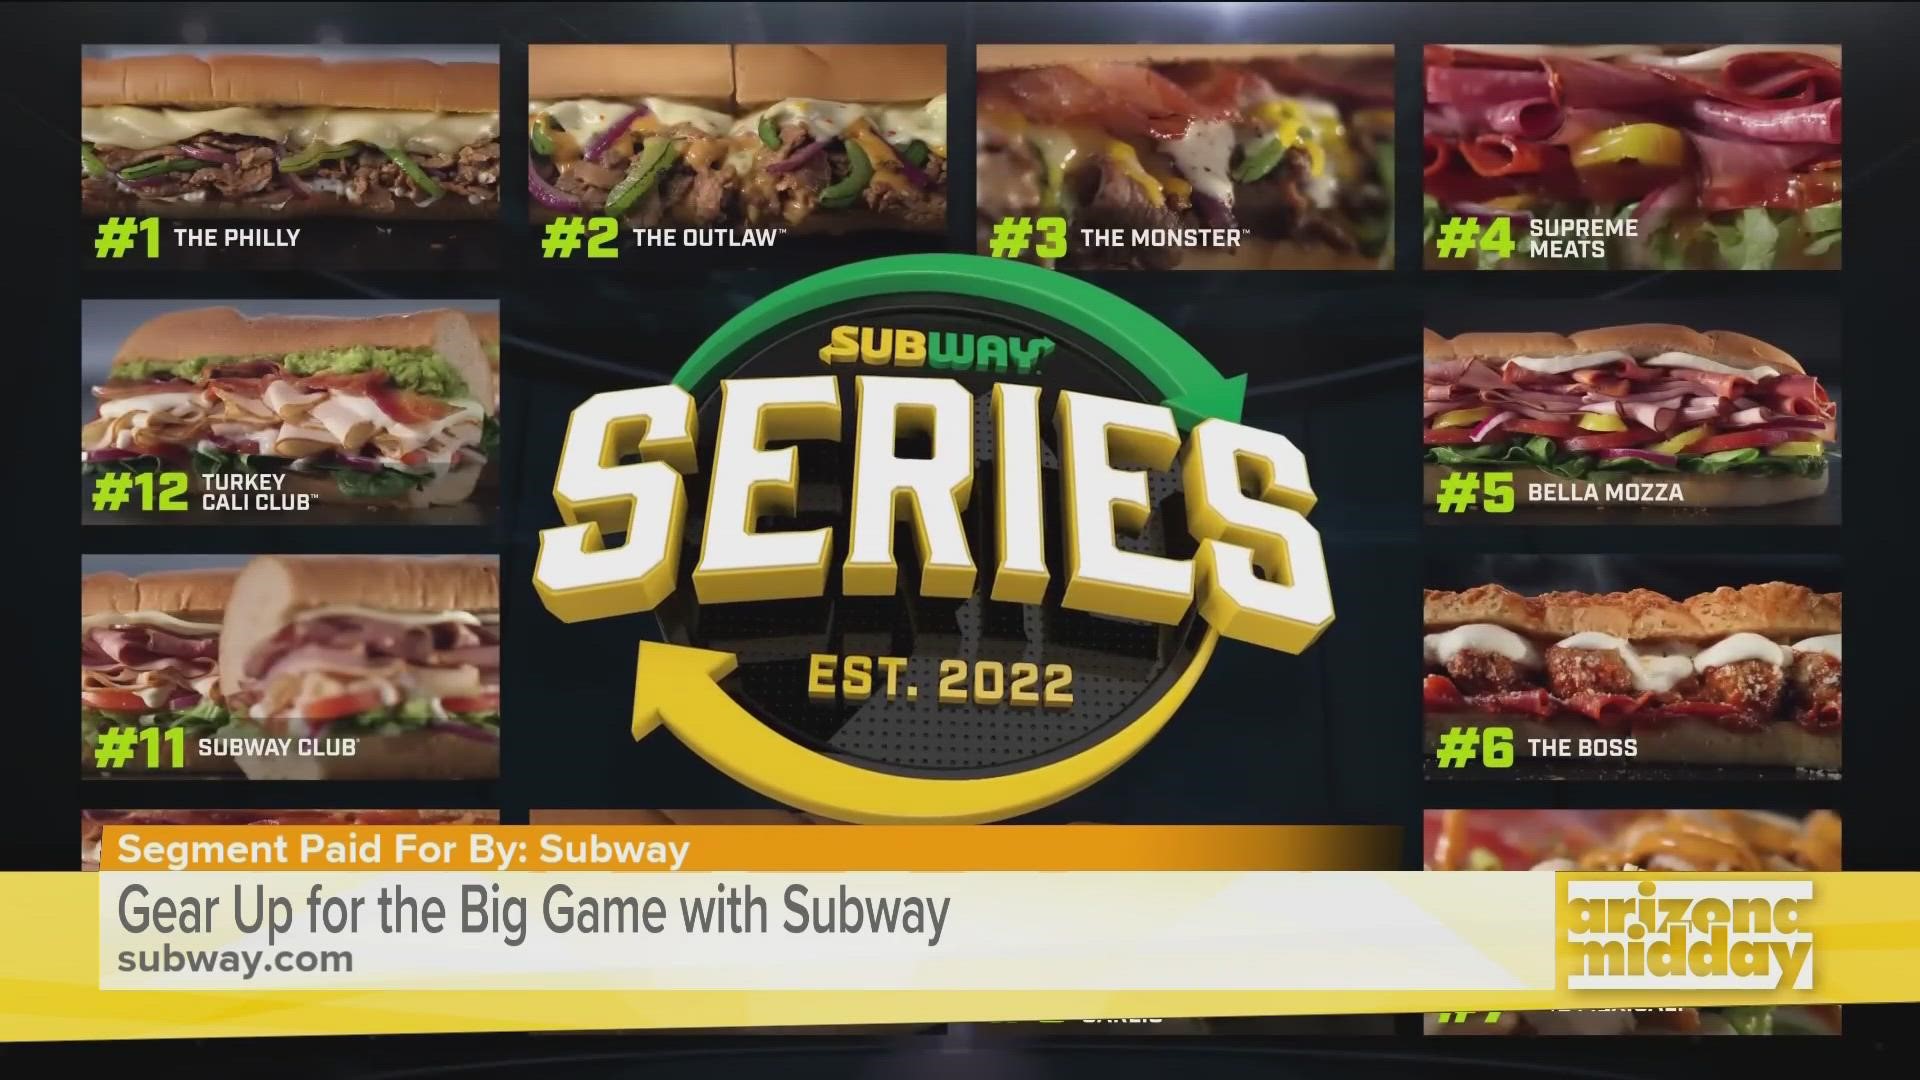 Subway will level up your Super Bowl watch party!